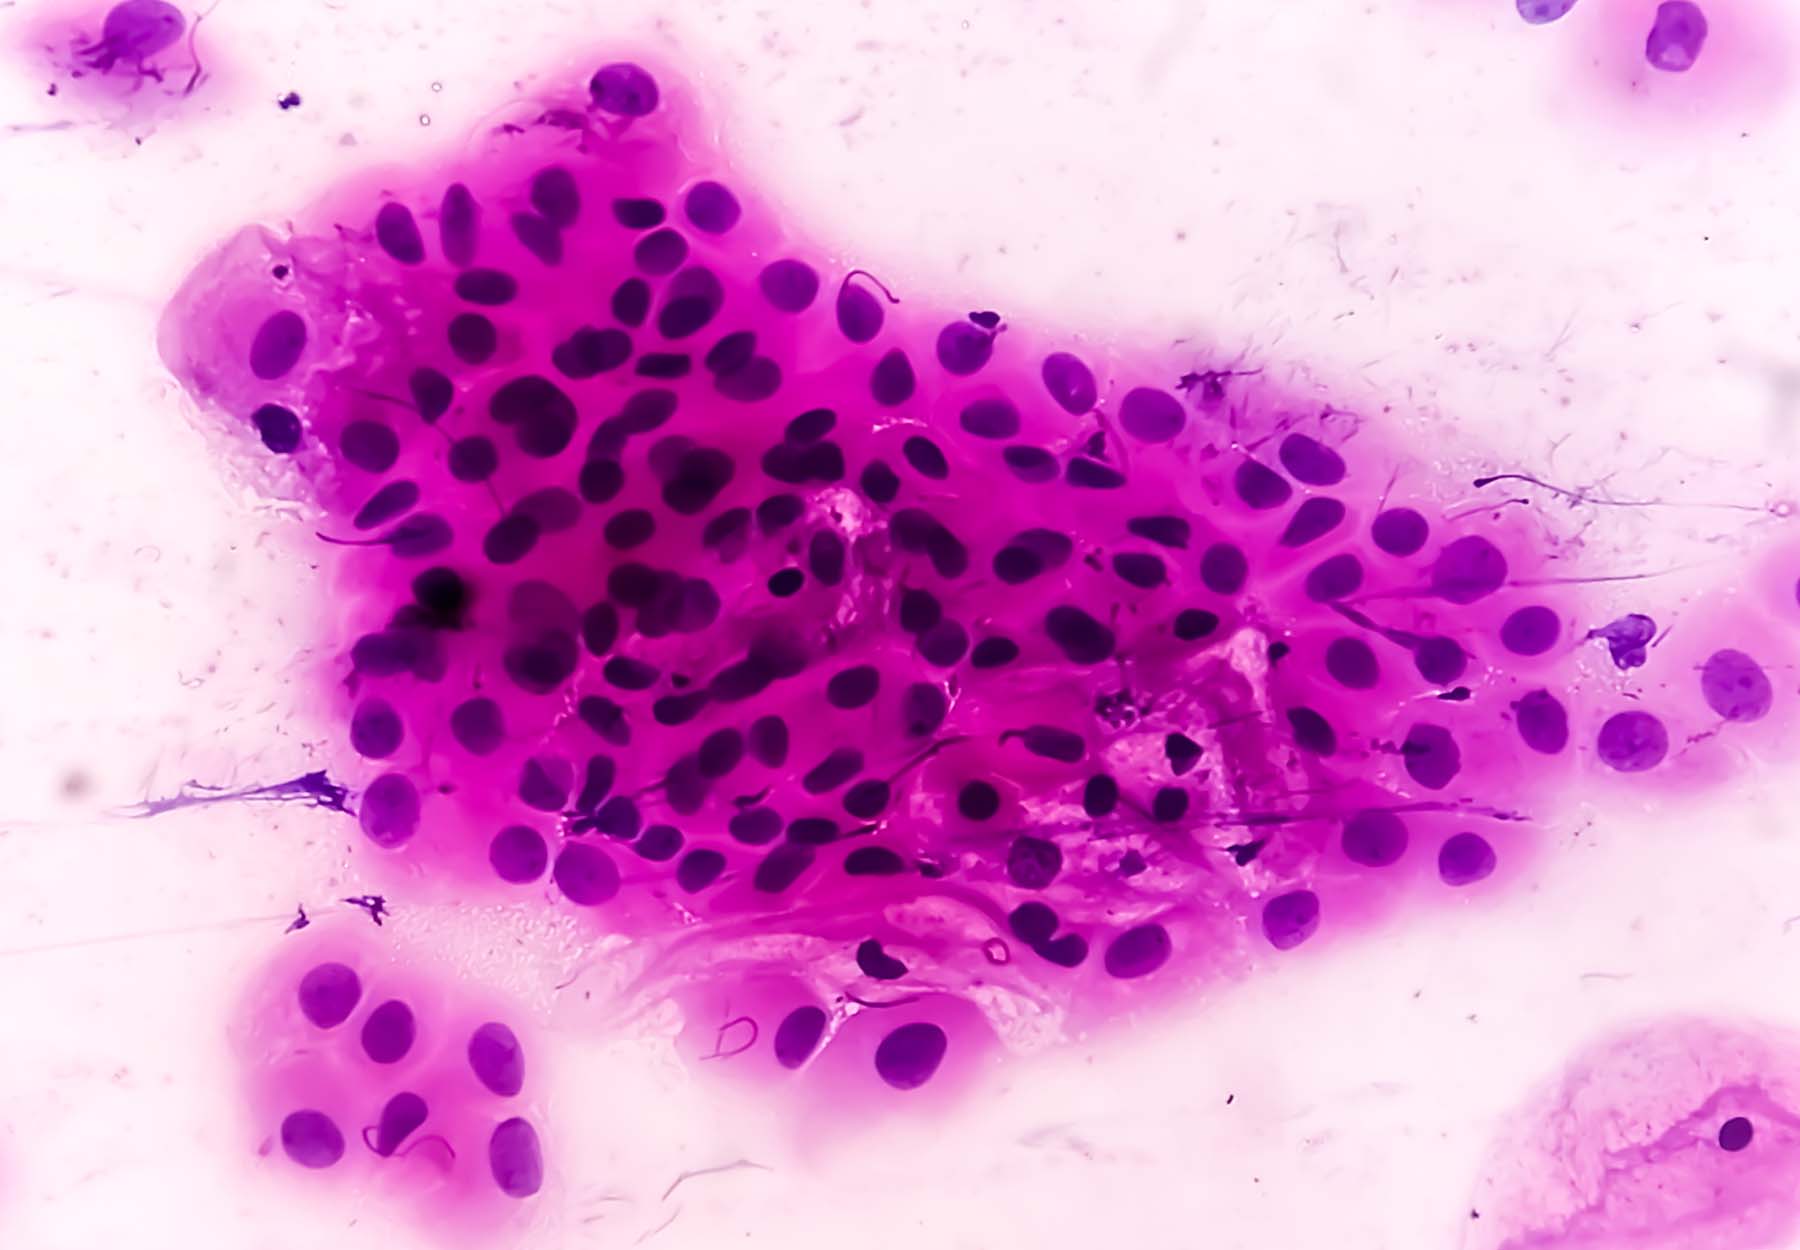 cervical cancer cells stained a bright magenta color.